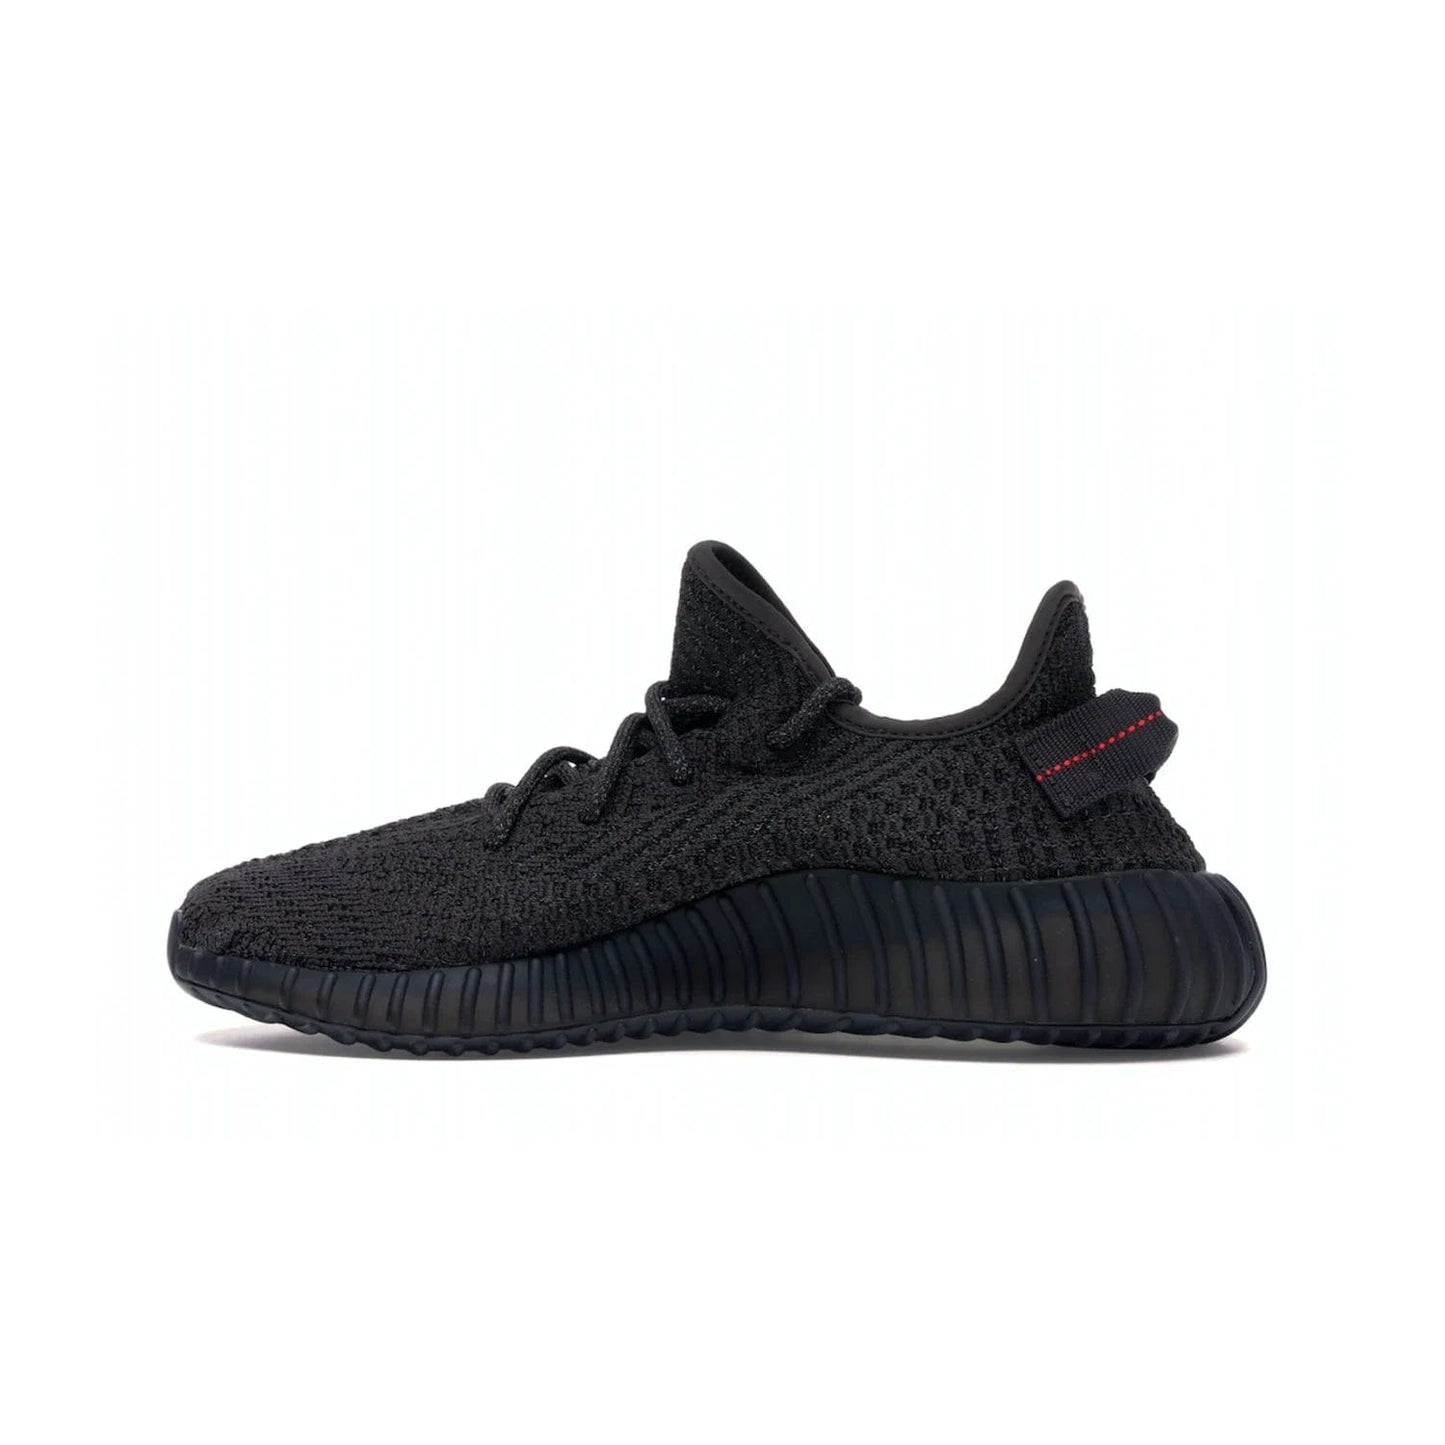 adidas Yeezy Boost 350 V2 Static Black (Reflective) - Image 20 - Only at www.BallersClubKickz.com - Make a statement with the adidas Yeezy Boost 350 V2 Static Black Reflective. All-black upper, reflective accents, midsole, and sole combine for a stylish look. High quality materials. June 2019 release. Add to your collection today.